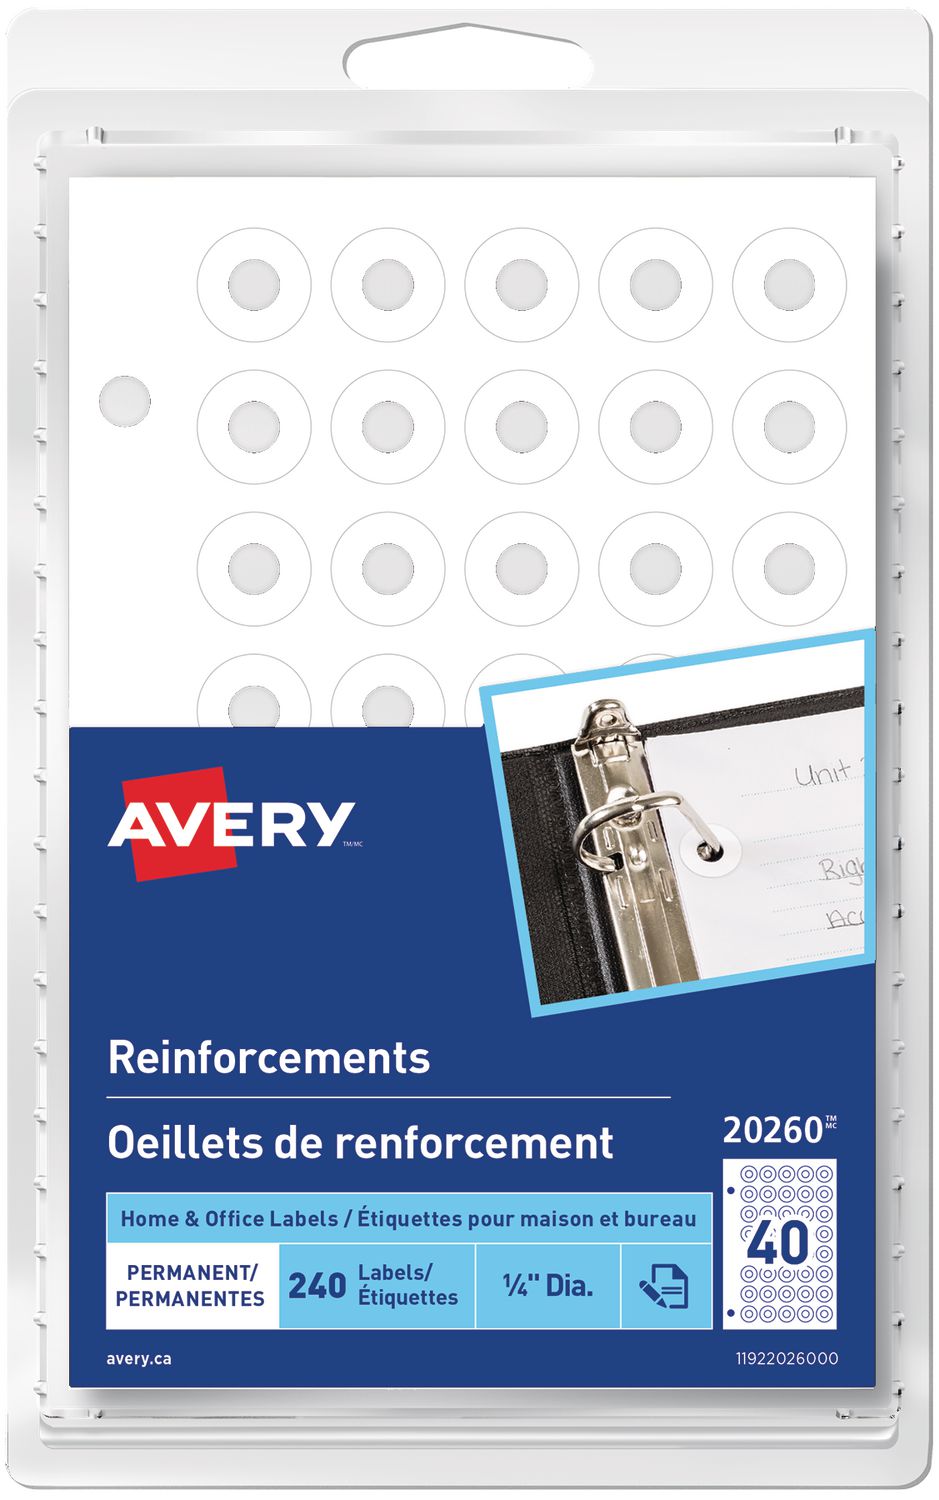 Avery Permanent White Reinforcements Labels, Pack of 240, 1/4 Dia.